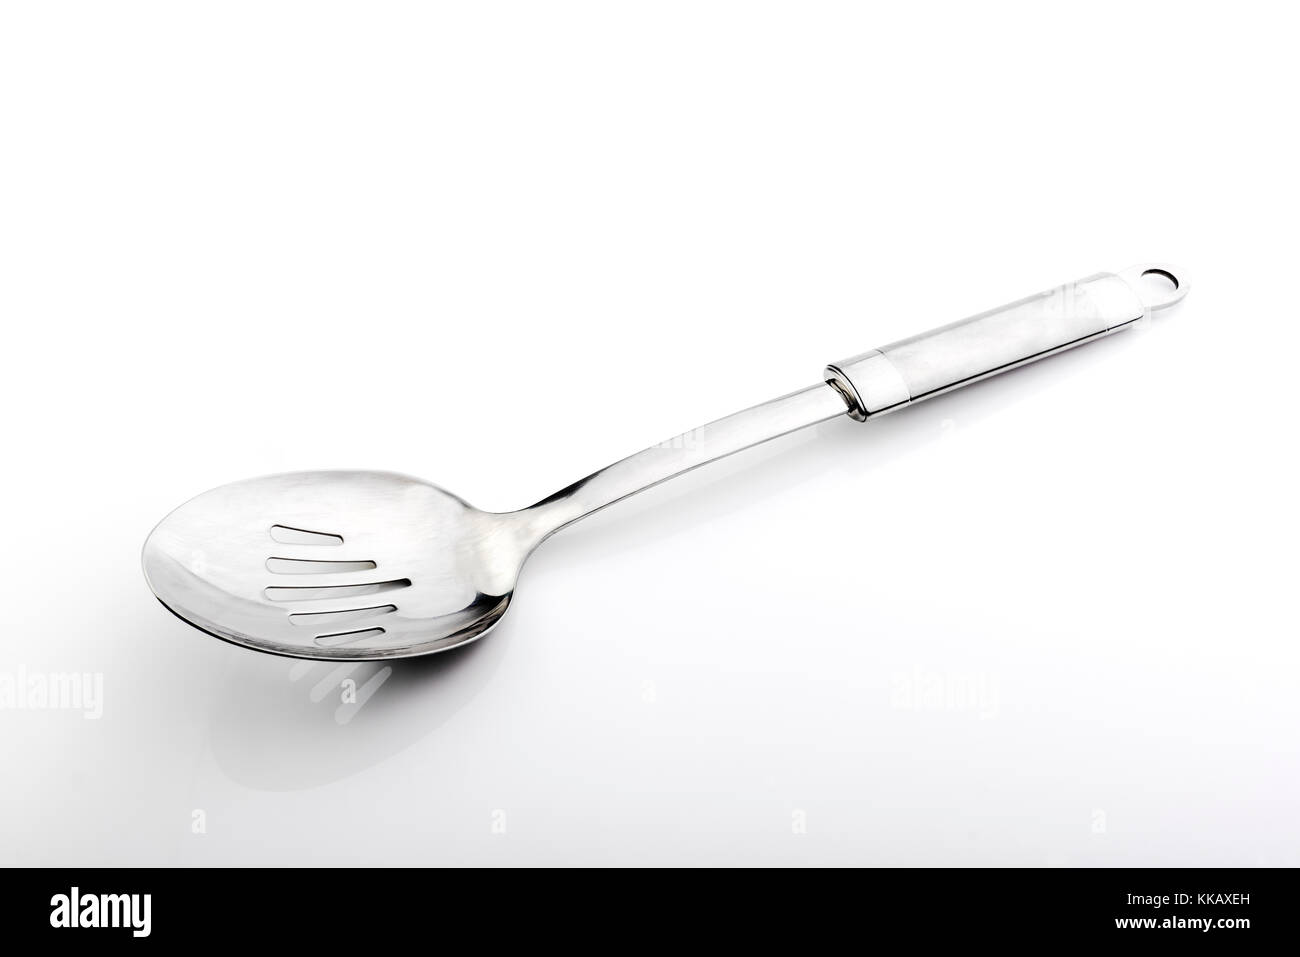 Slotted drainer spoon, stainless steel kitchenware. Stock Photo